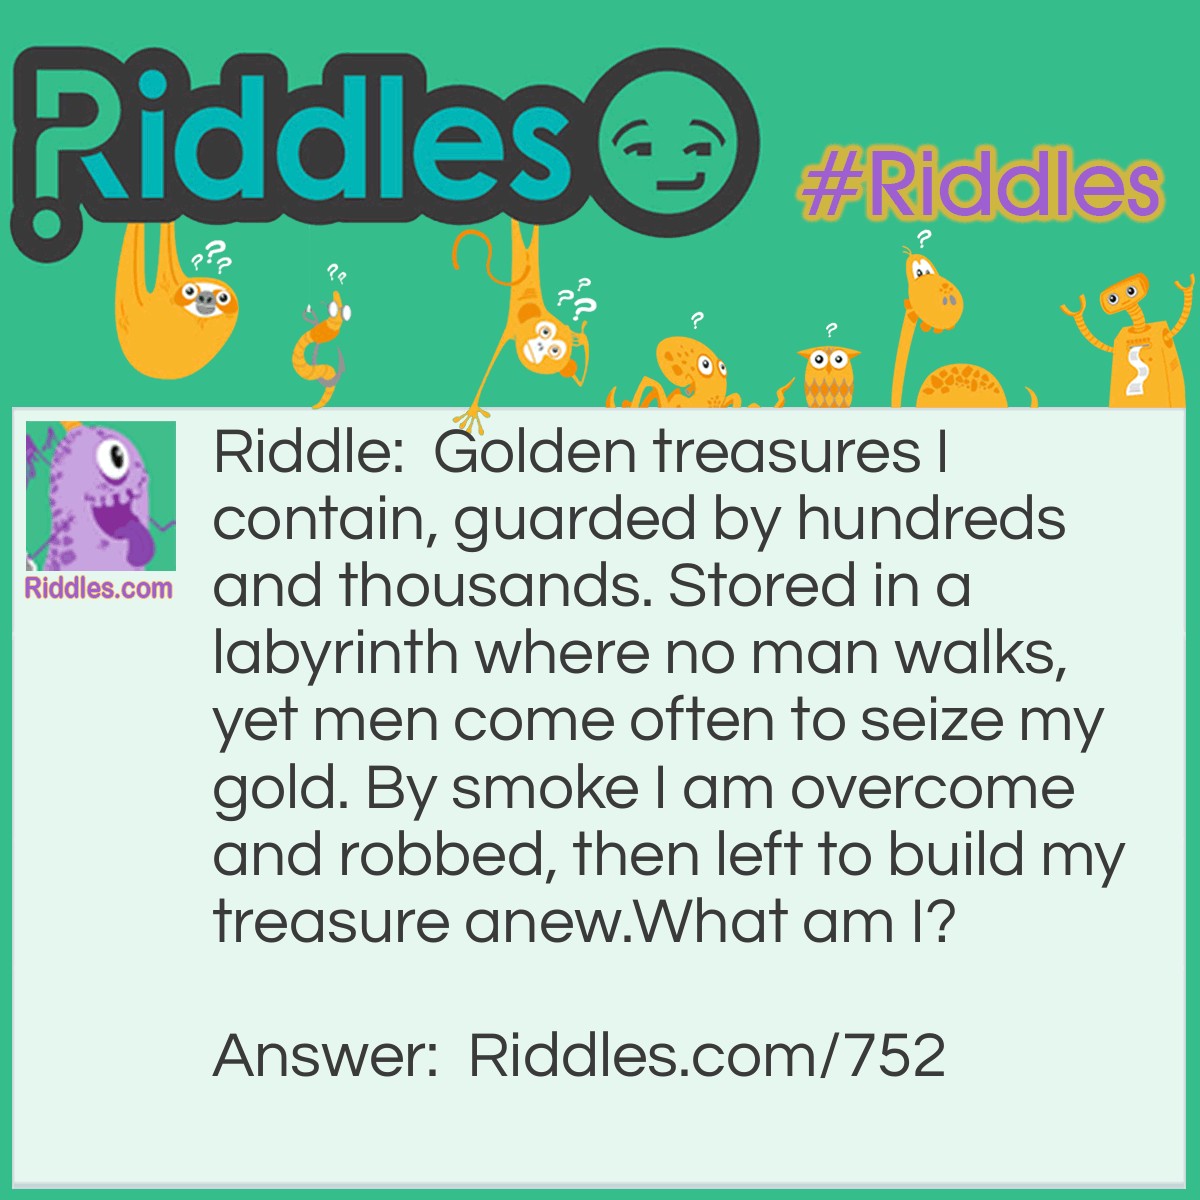 Riddle: Golden treasures I contain, guarded by hundreds and thousands. Stored in a labyrinth where no man walks, yet men come often to seize my gold. By smoke I am overcome and robbed, then left to build my treasure anew.
What am I? Answer: A beehive.